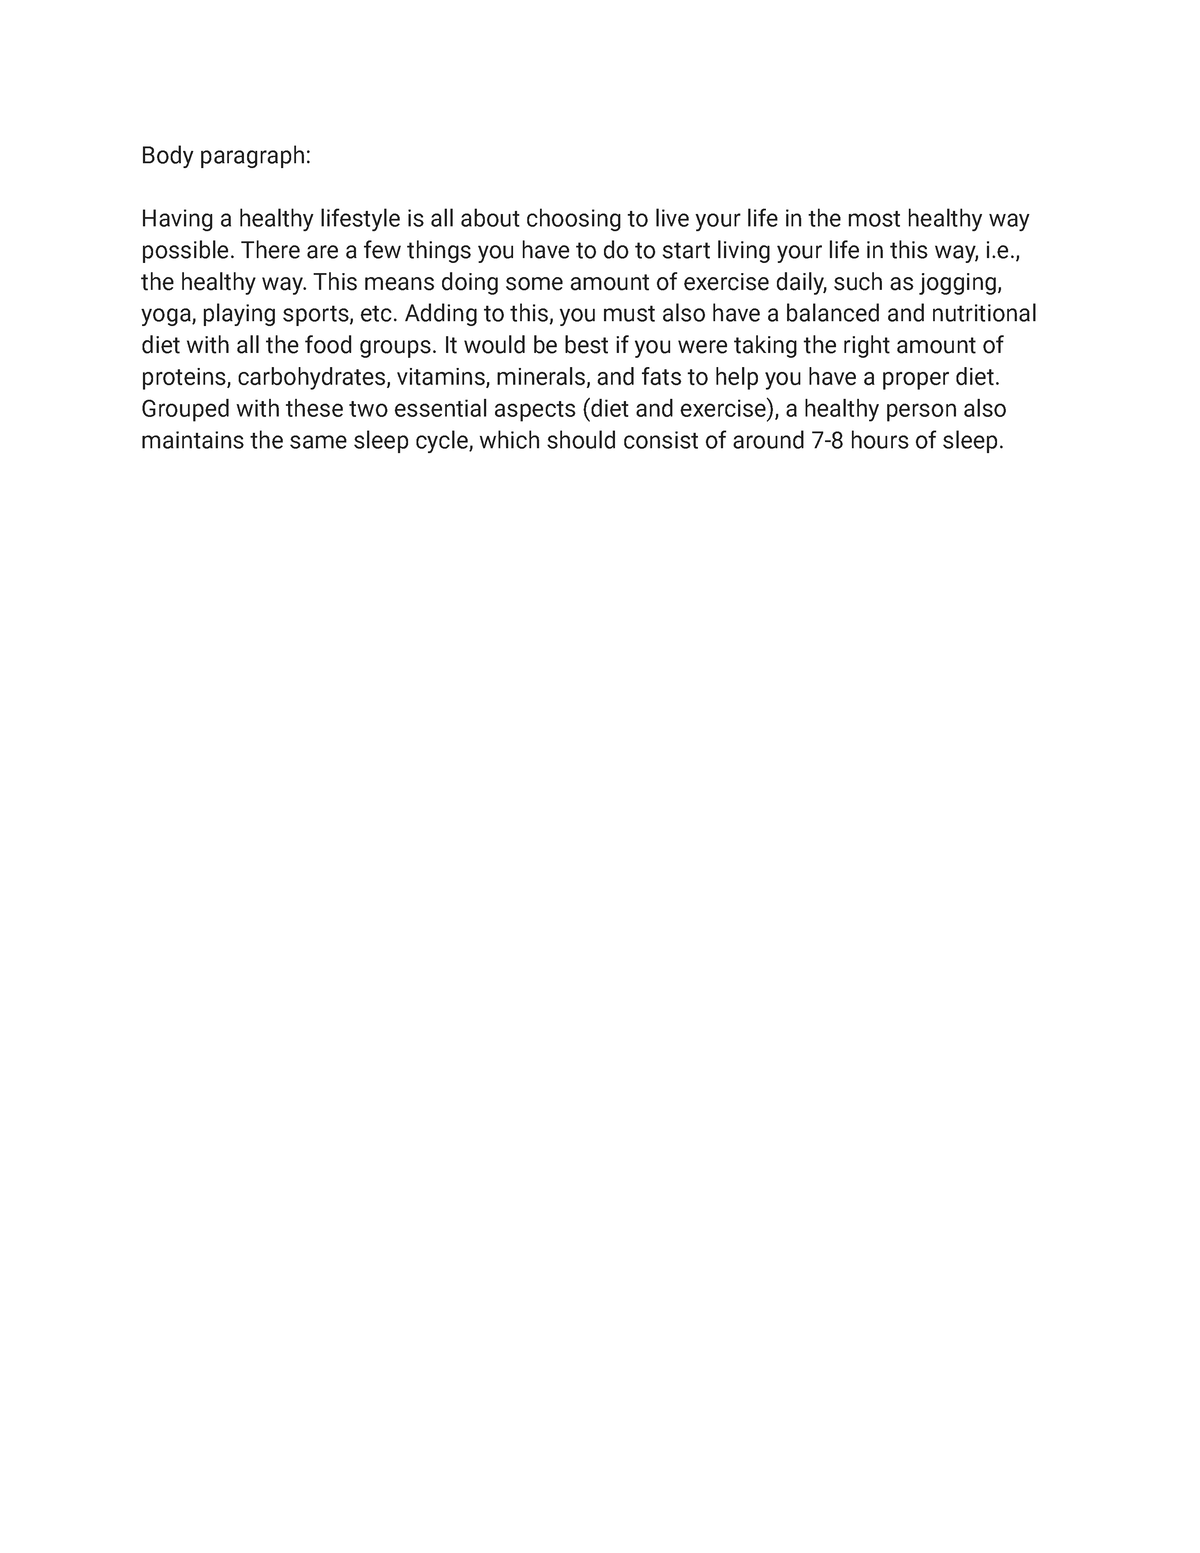 Body paragraph - essay - Body paragraph: Having a healthy lifestyle is ...